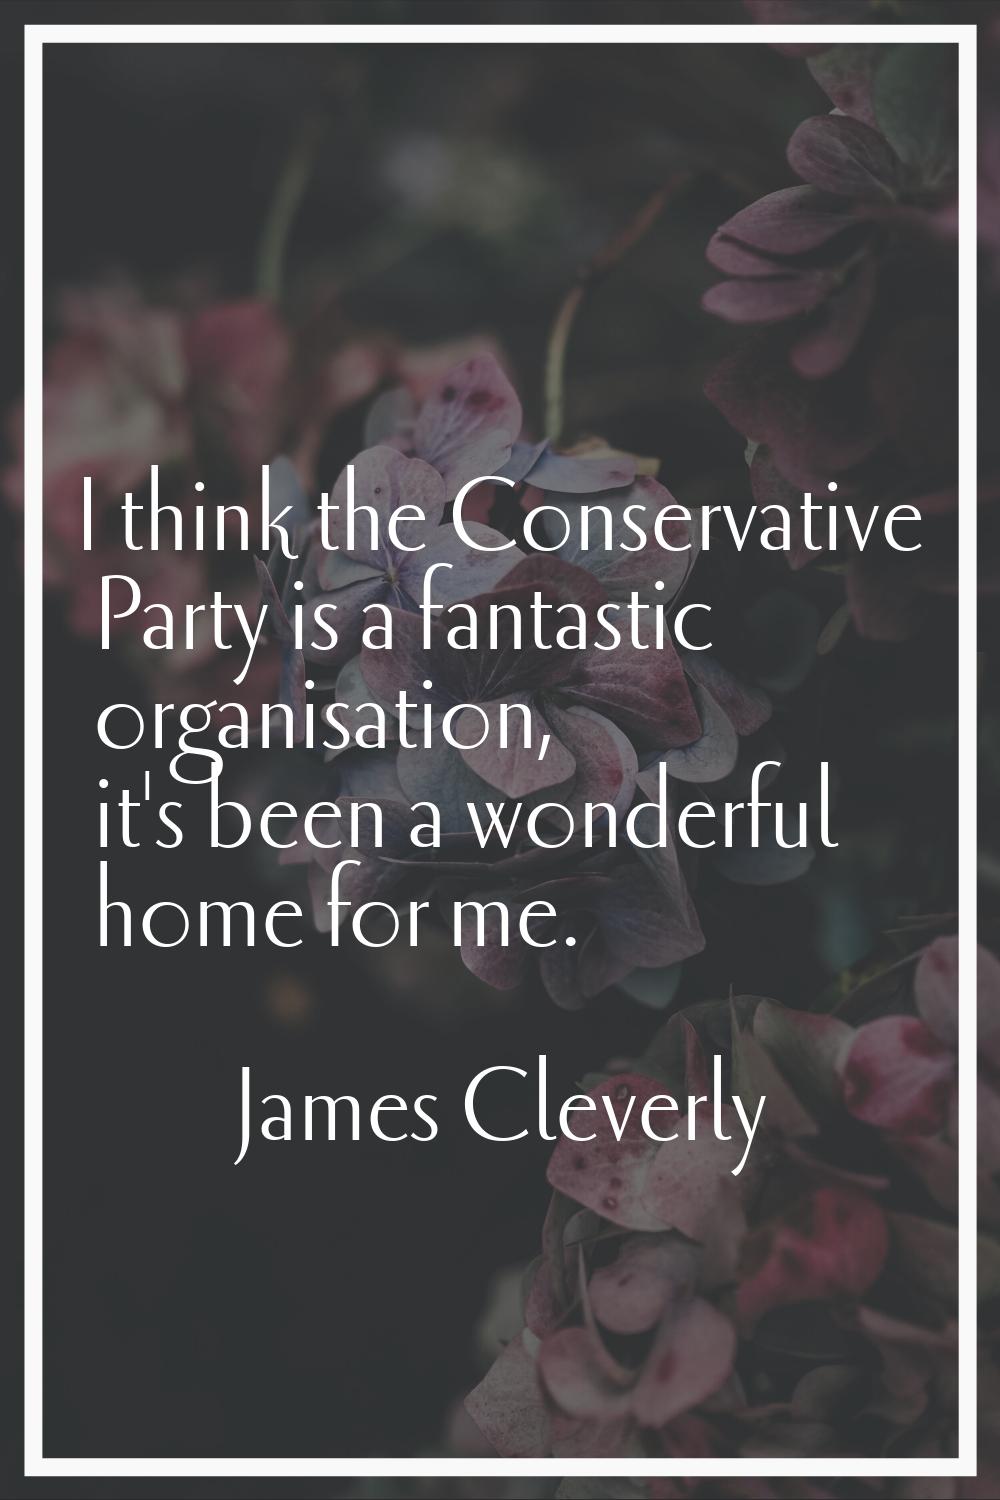 I think the Conservative Party is a fantastic organisation, it's been a wonderful home for me.